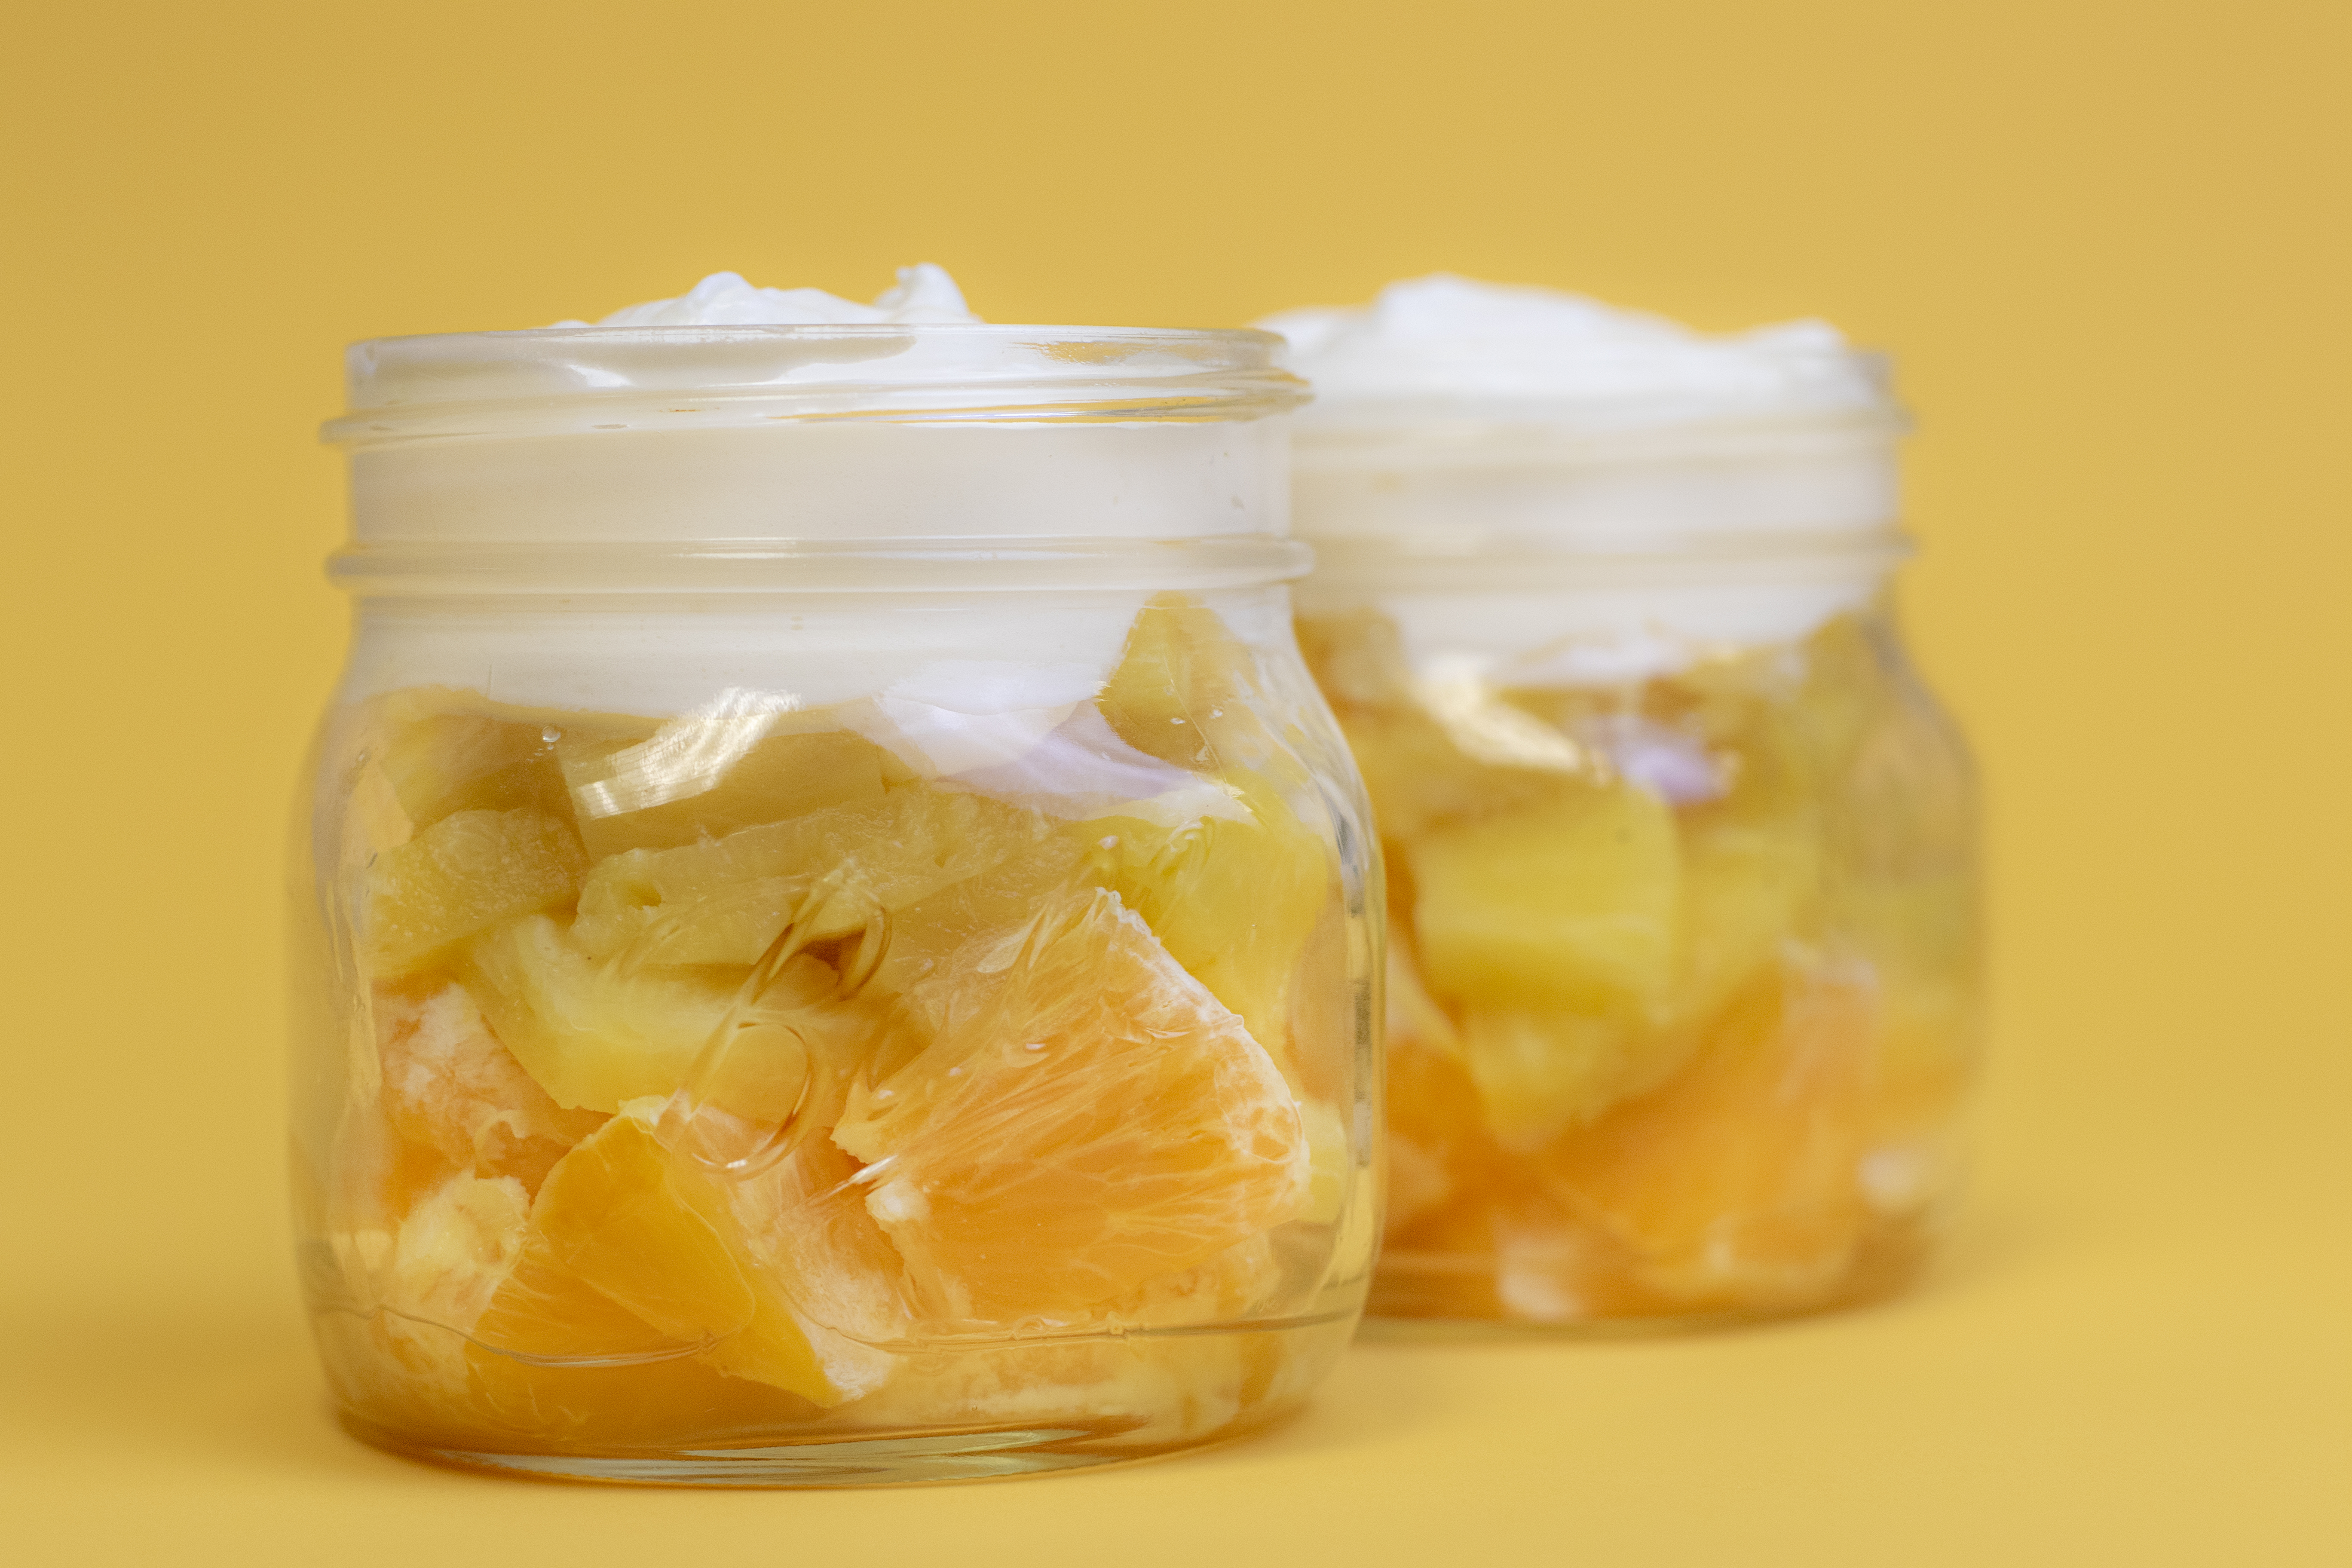 Oranges, pineapple, and whipped topping in a clear mason jar to look like a candy cane on a yellow backdrop.